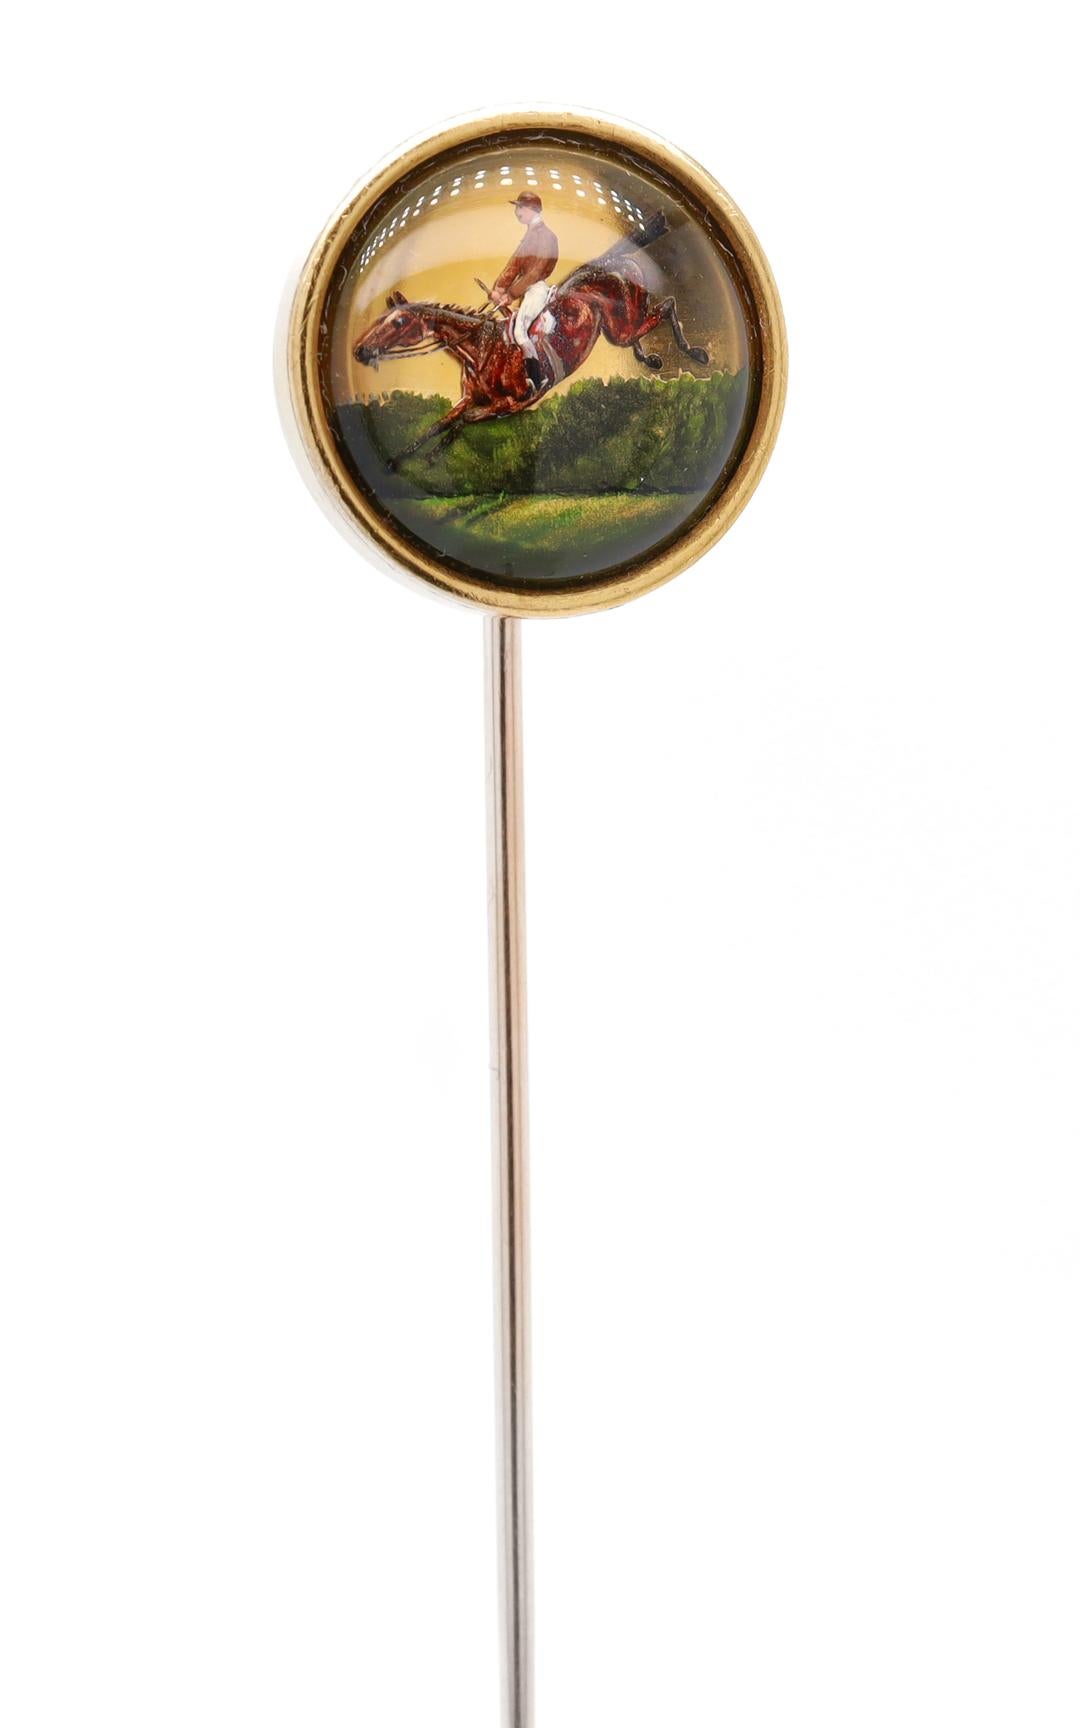 A fine equestrian related stick pin.

In 18 karat yellow gold.

With a wonderful Essex crystal image of a horse and rider in full leap in a steeplechase event with extraordinary detail of horse and rider, and even a shadow under horse and